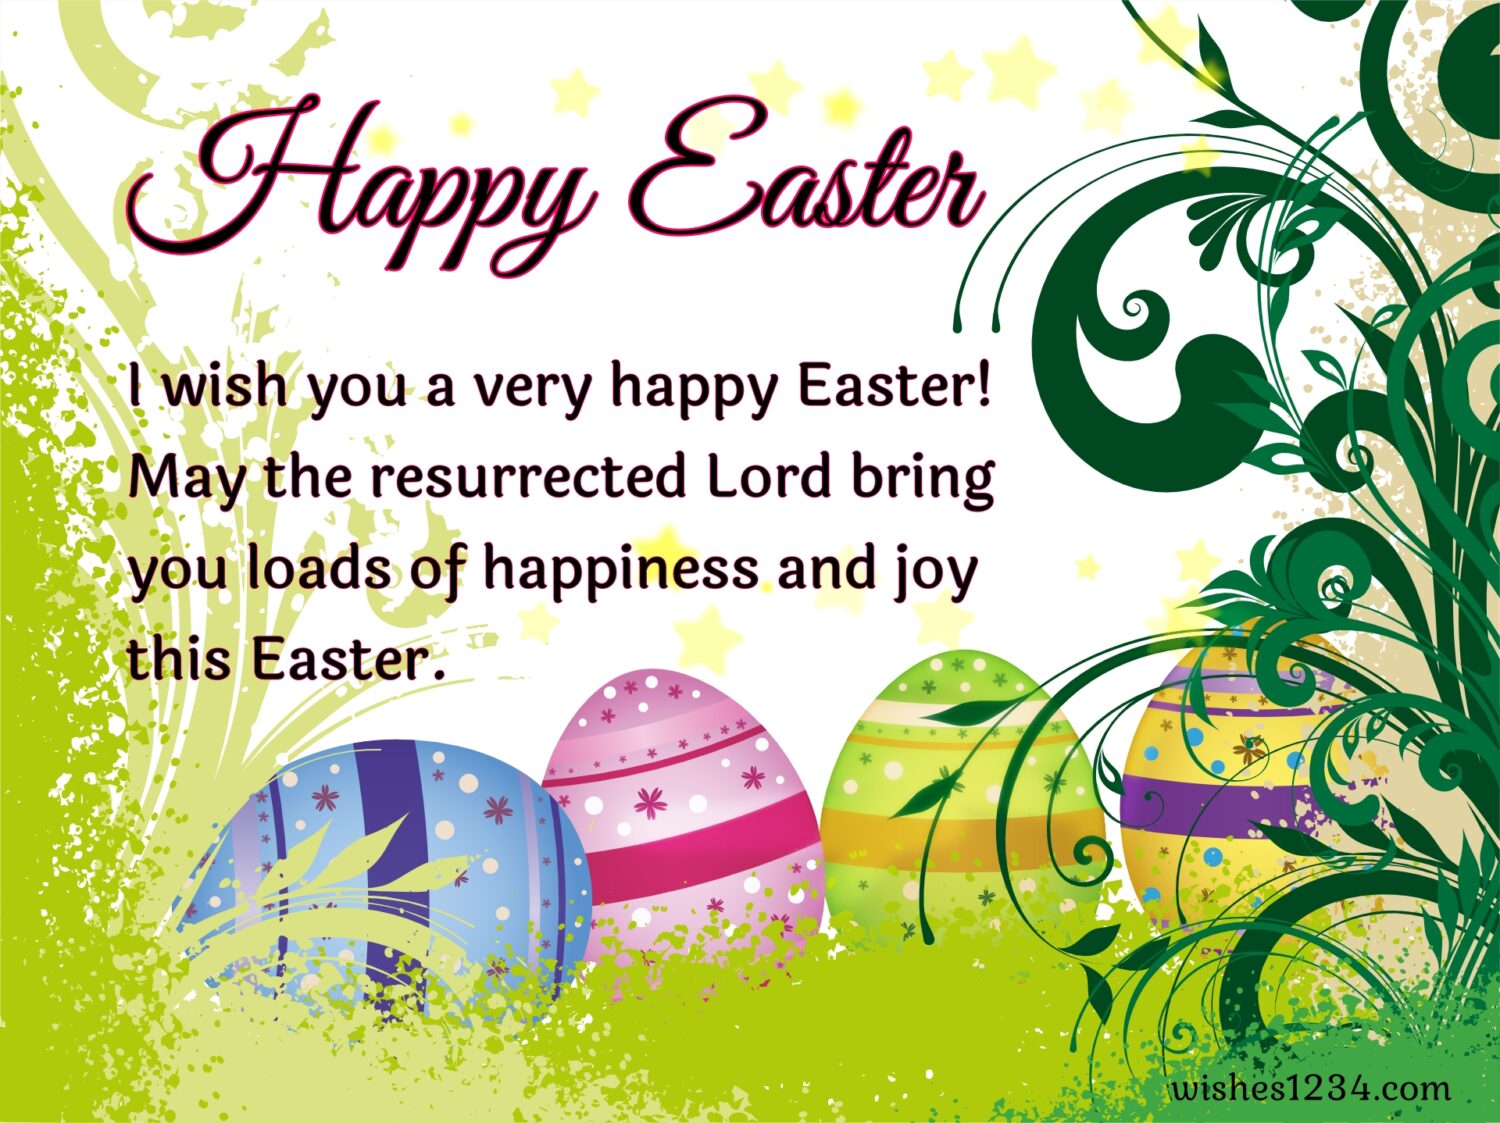 Four Easter eggs, Happy Easter Wishes, Quotes & Images.